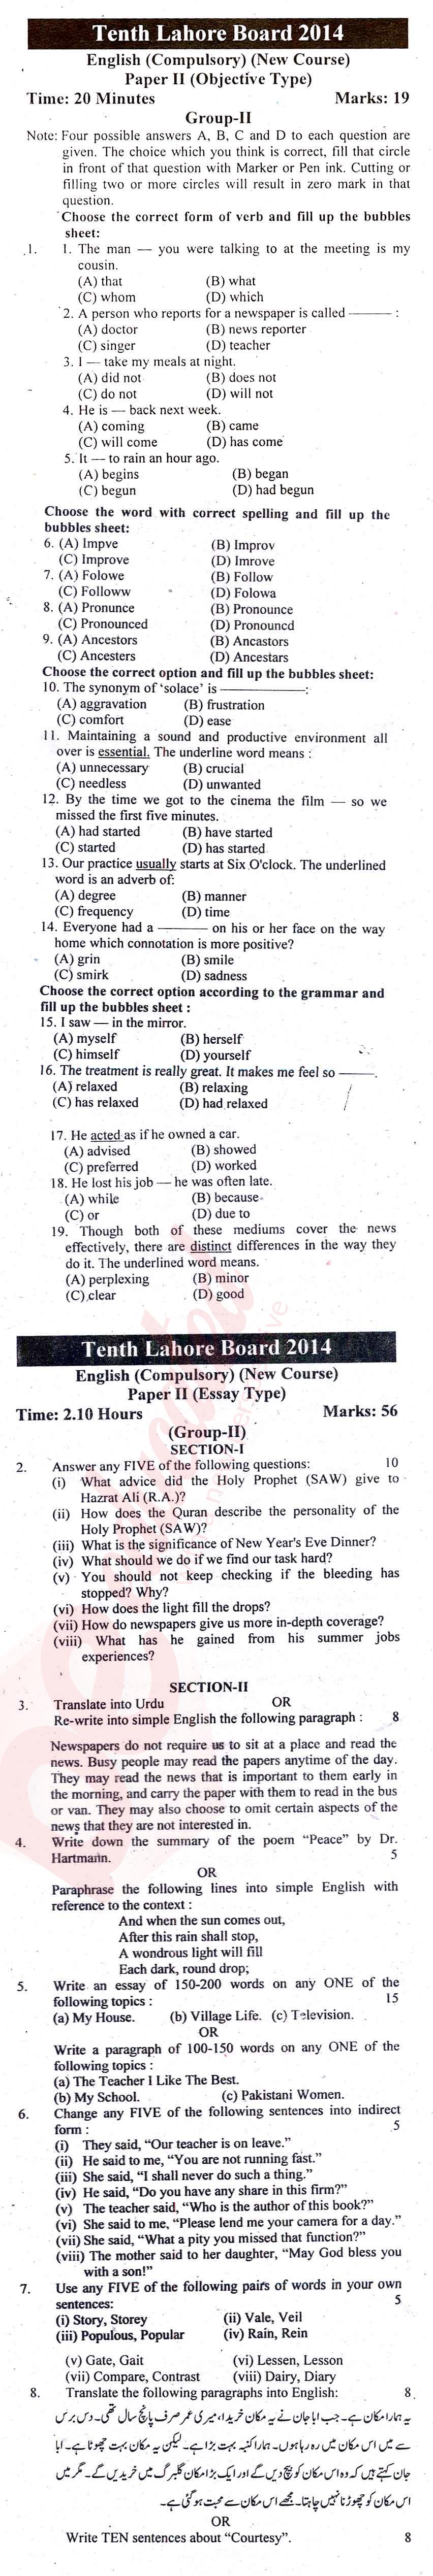 English 10th class Past Paper Group 2 BISE Lahore 2014